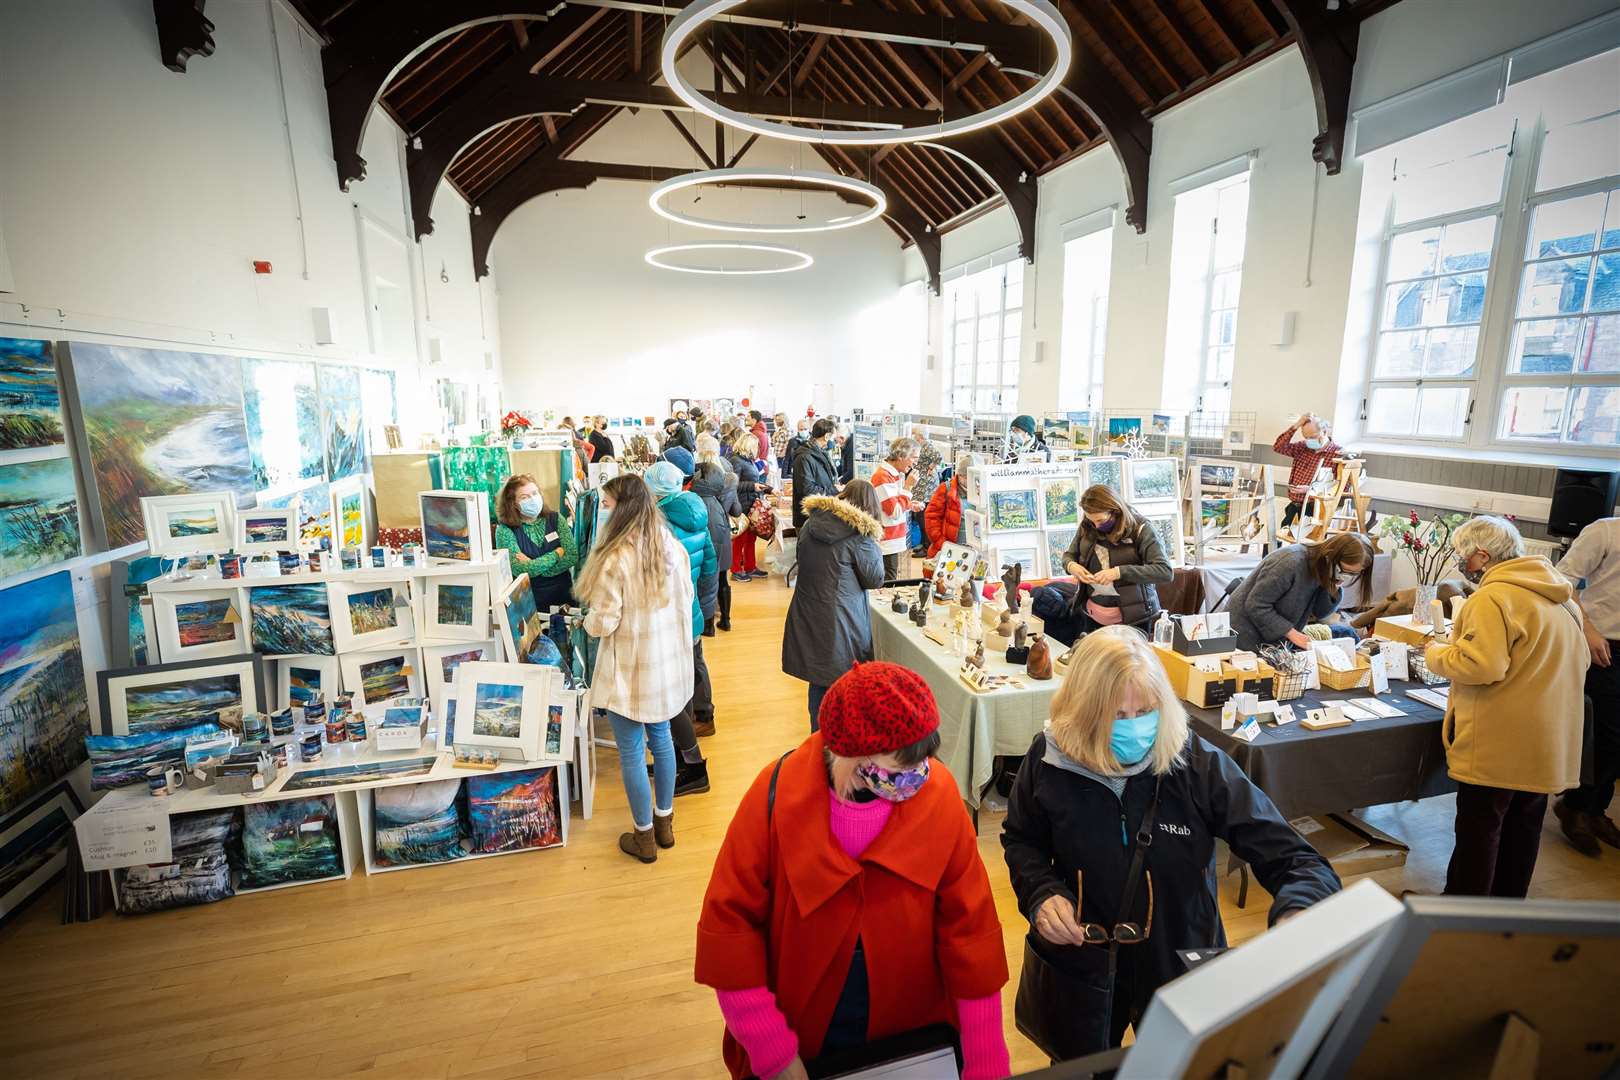 A previous artists’ market at the Inverness Creative Academy.